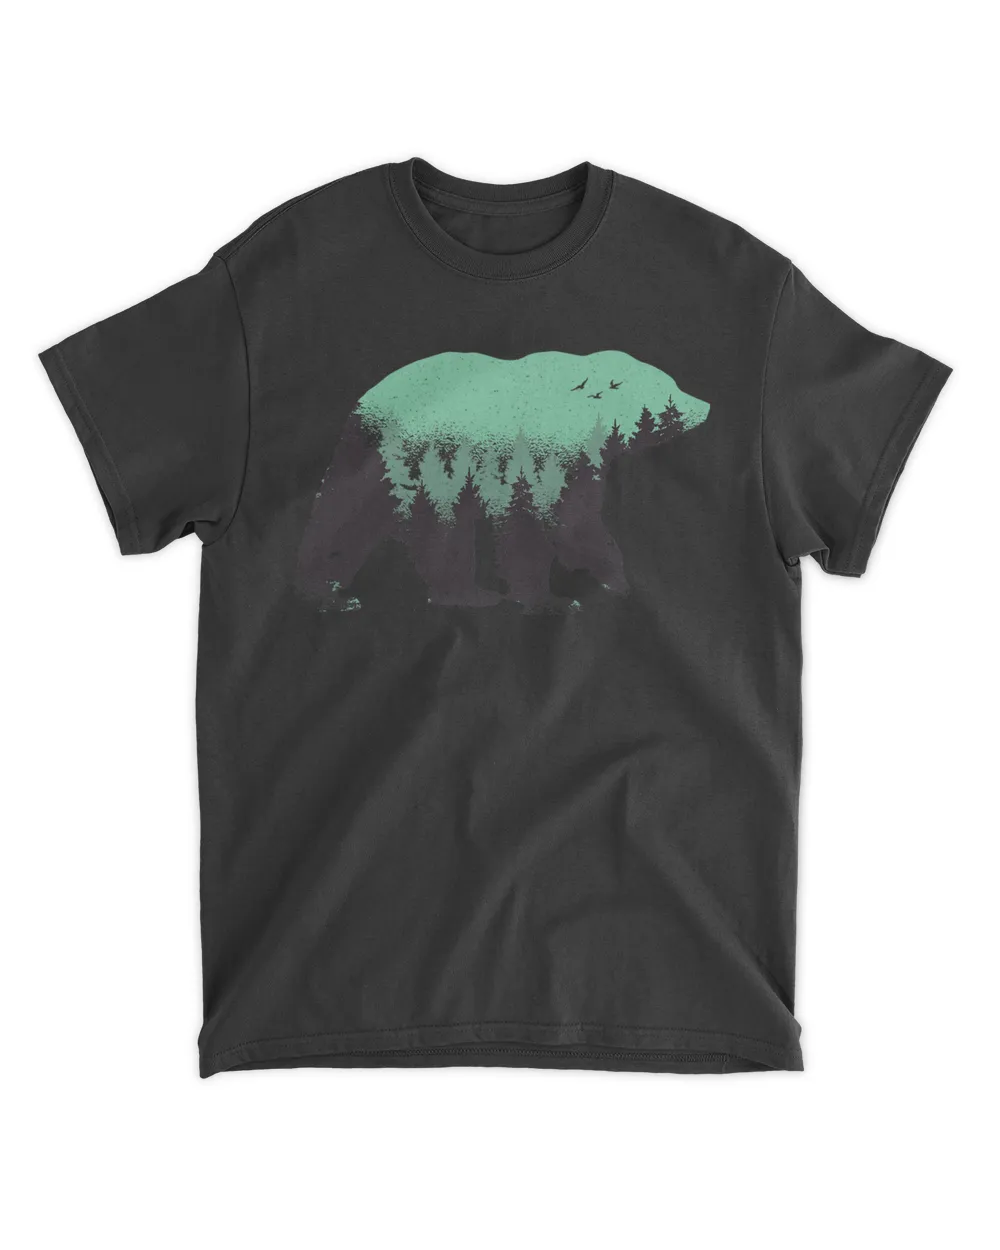 Bear Camping, Nature and Hiking T-Shirt with Forest T-Shirt